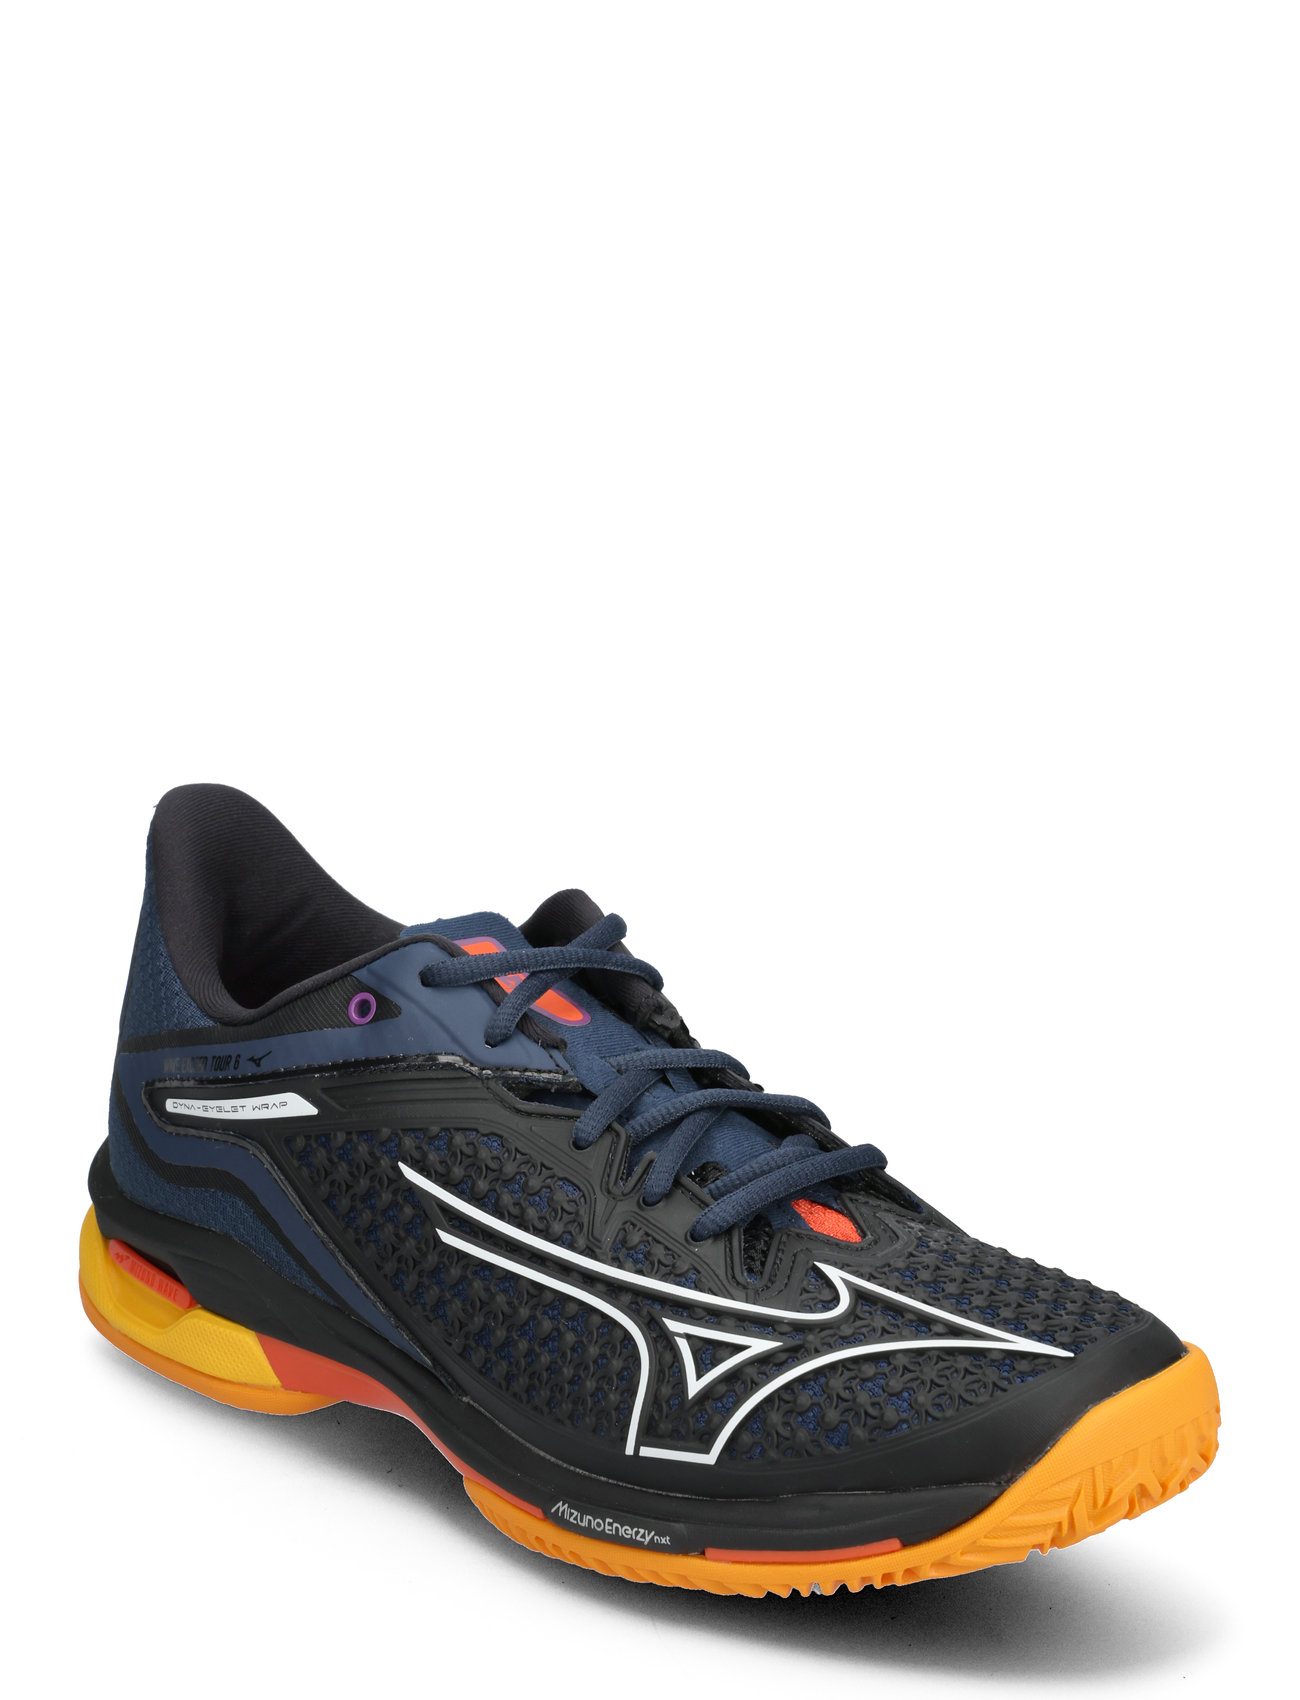 Wave Exceed Tour 6 Padel Sport Sport Shoes Racketsports Shoes Tennis Shoes Navy Mizuno